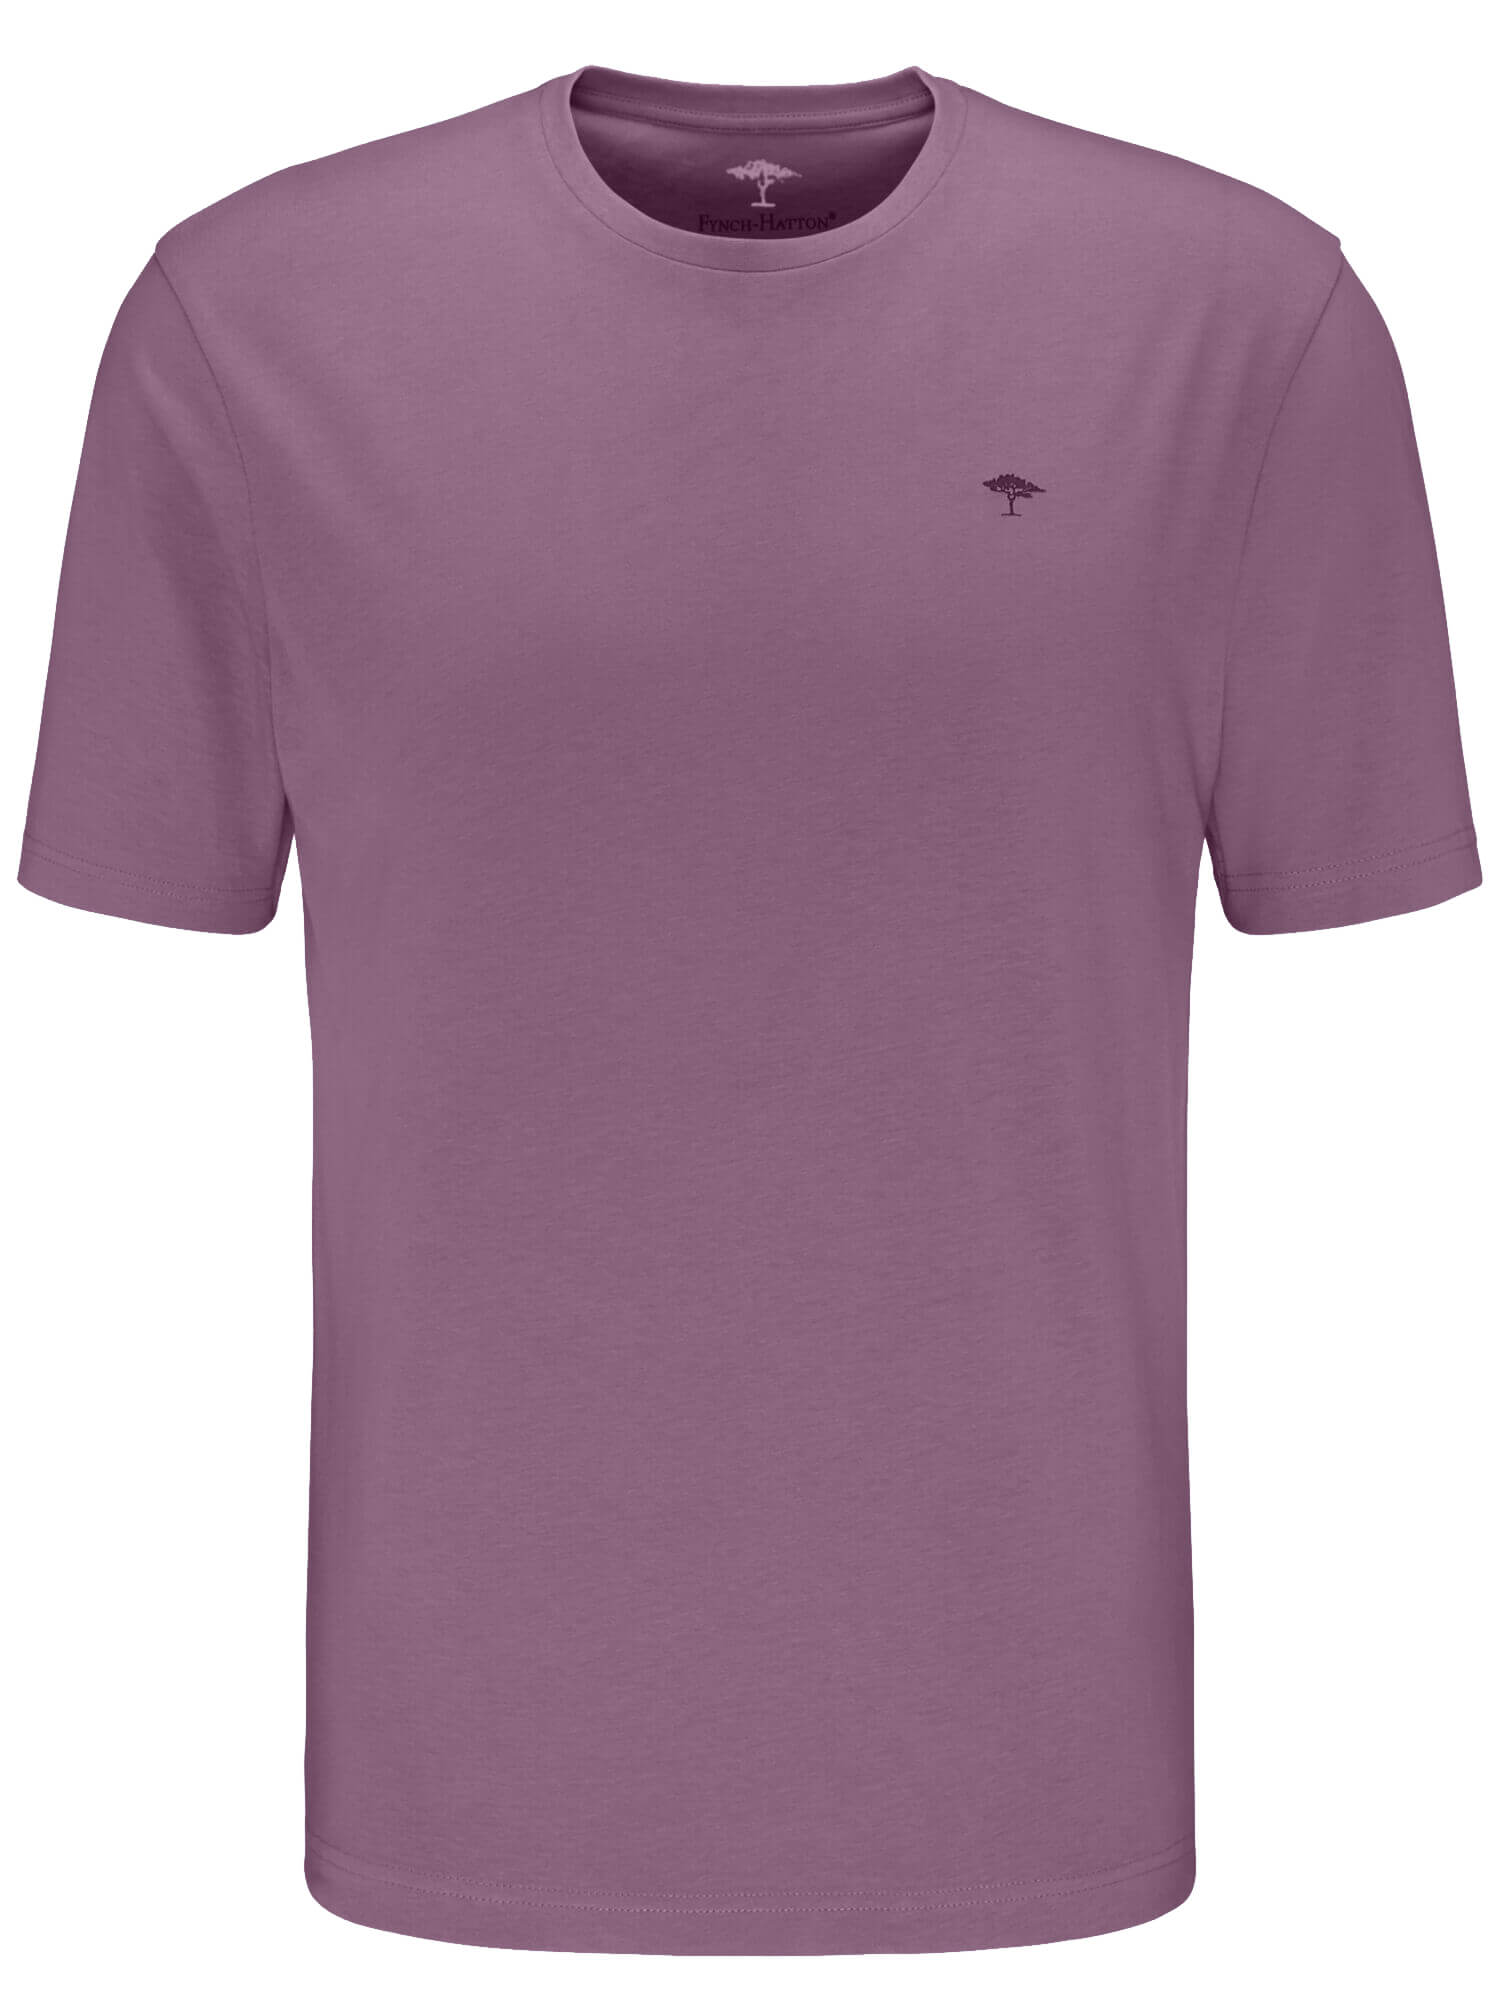 Haslemere Fynch - of Tee O-Neck Davids Shirts Hatton